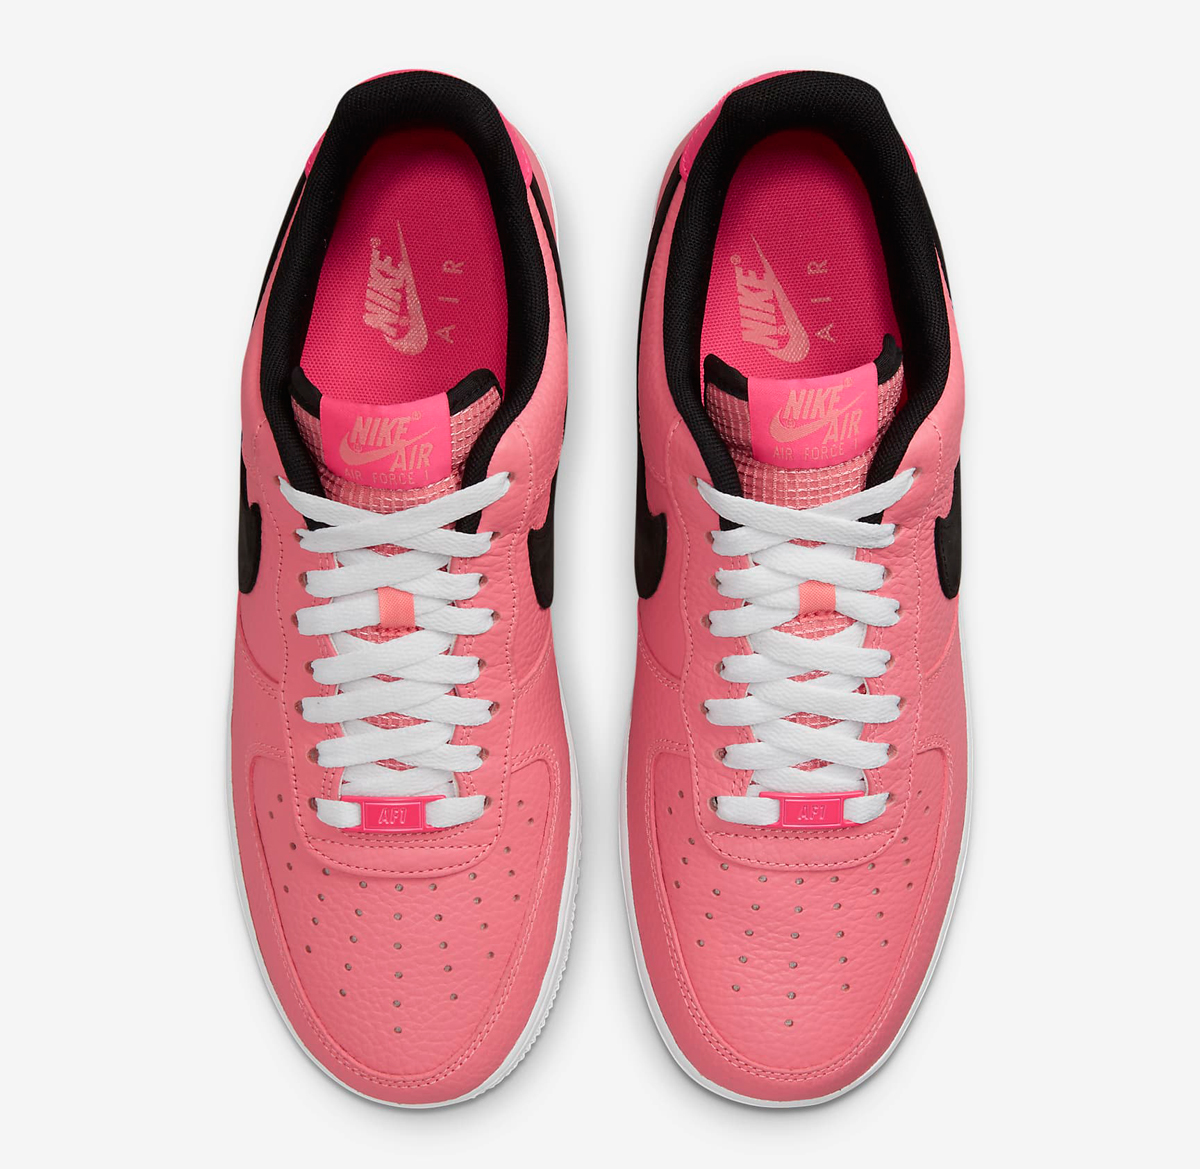 Nike-Air-Force-1-Low-Pink-Gaze-Where-to-Buy-4